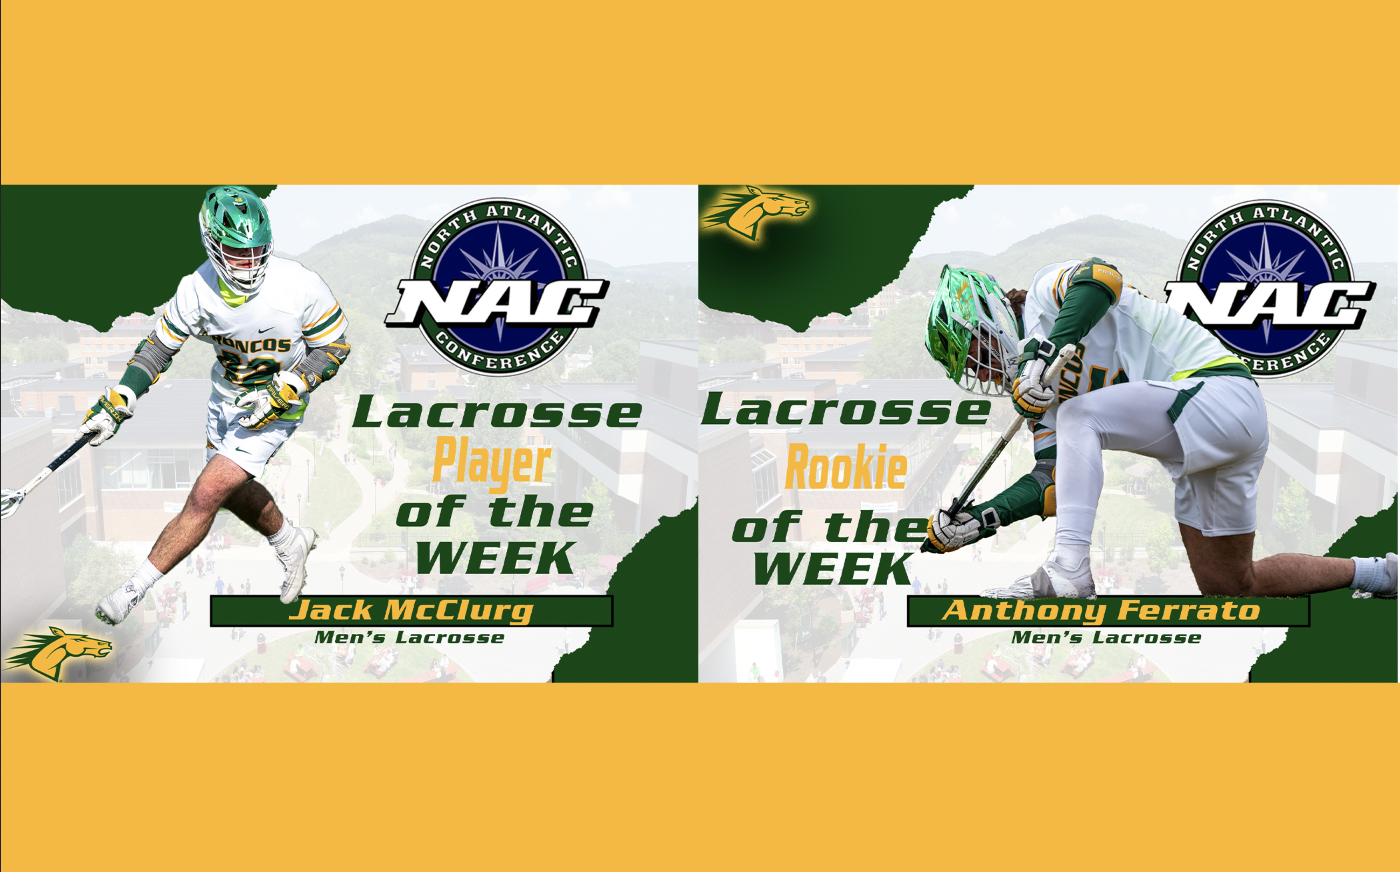 Men's Lacrosse land two on North Atlantic Conference Weekly Awards